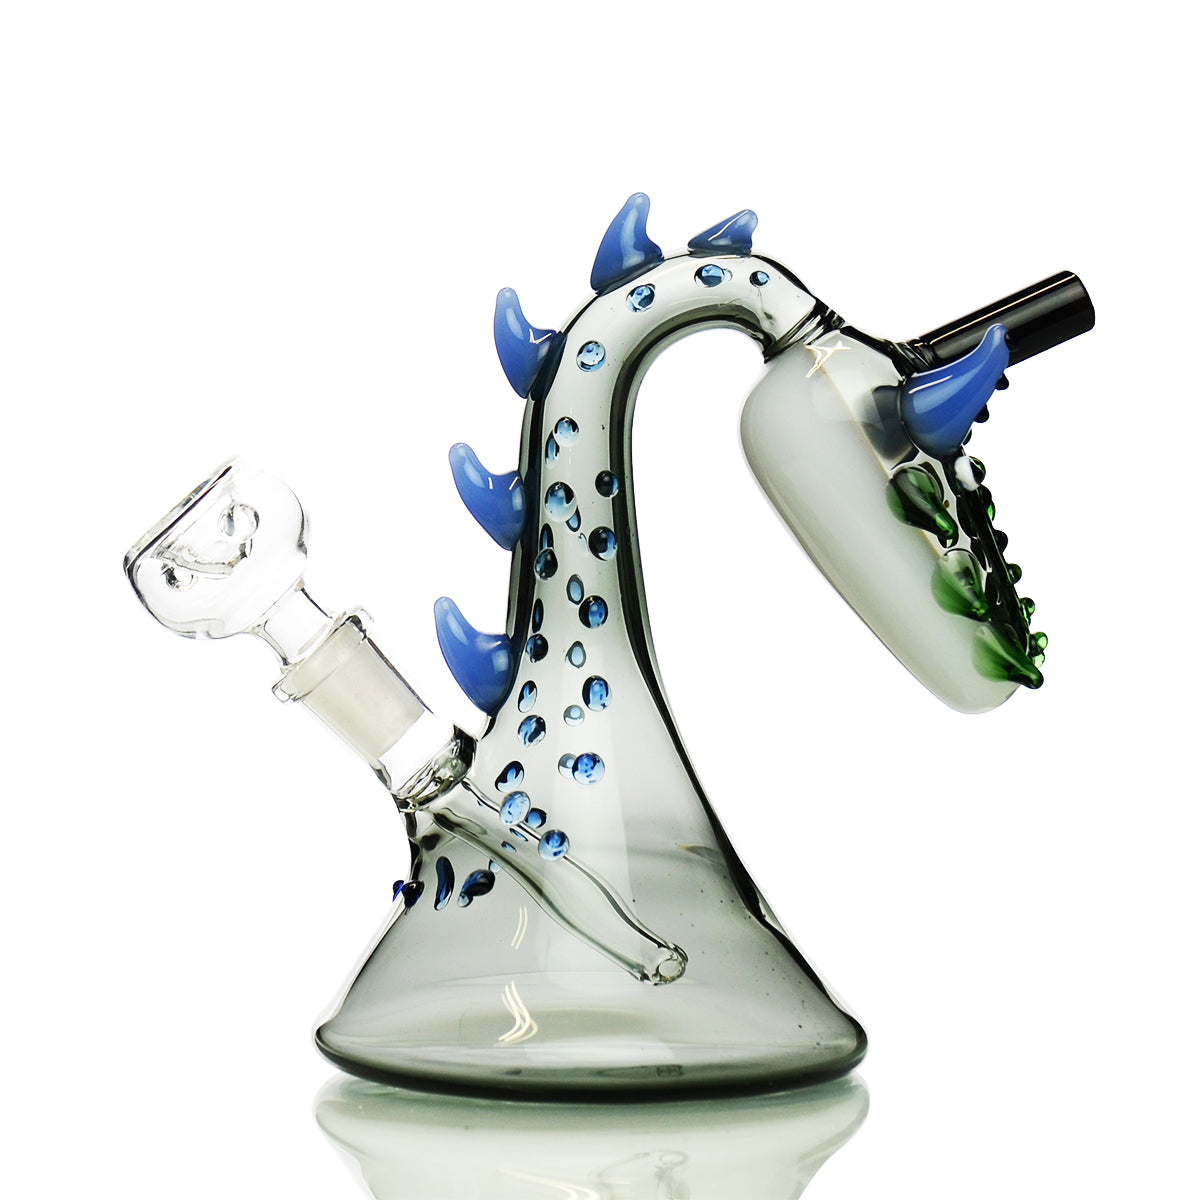 Dragon Water Pipe 7" with Color Tube Glass and 14mm Male Bowl